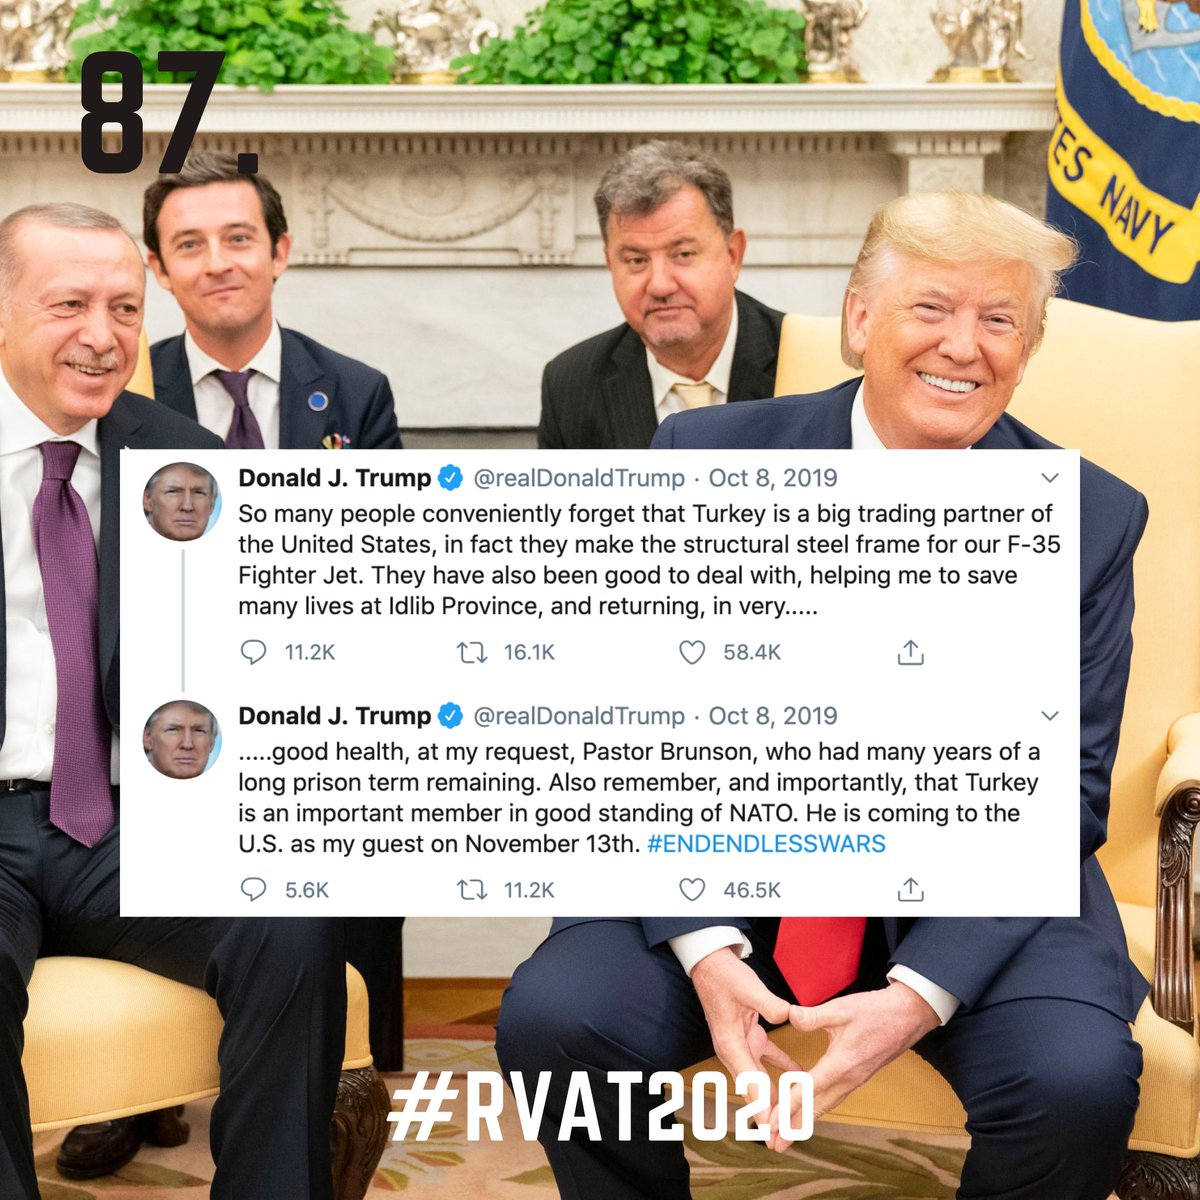 87. Oct 8, 2019: "So many people conveniently forget that Turkey is a big trading partner of the United States"Oct 7, 2019: "I will totally destroy and obliterate the Economy of Turkey" @realDonaldTrump is it you? Are you 'so many people'?